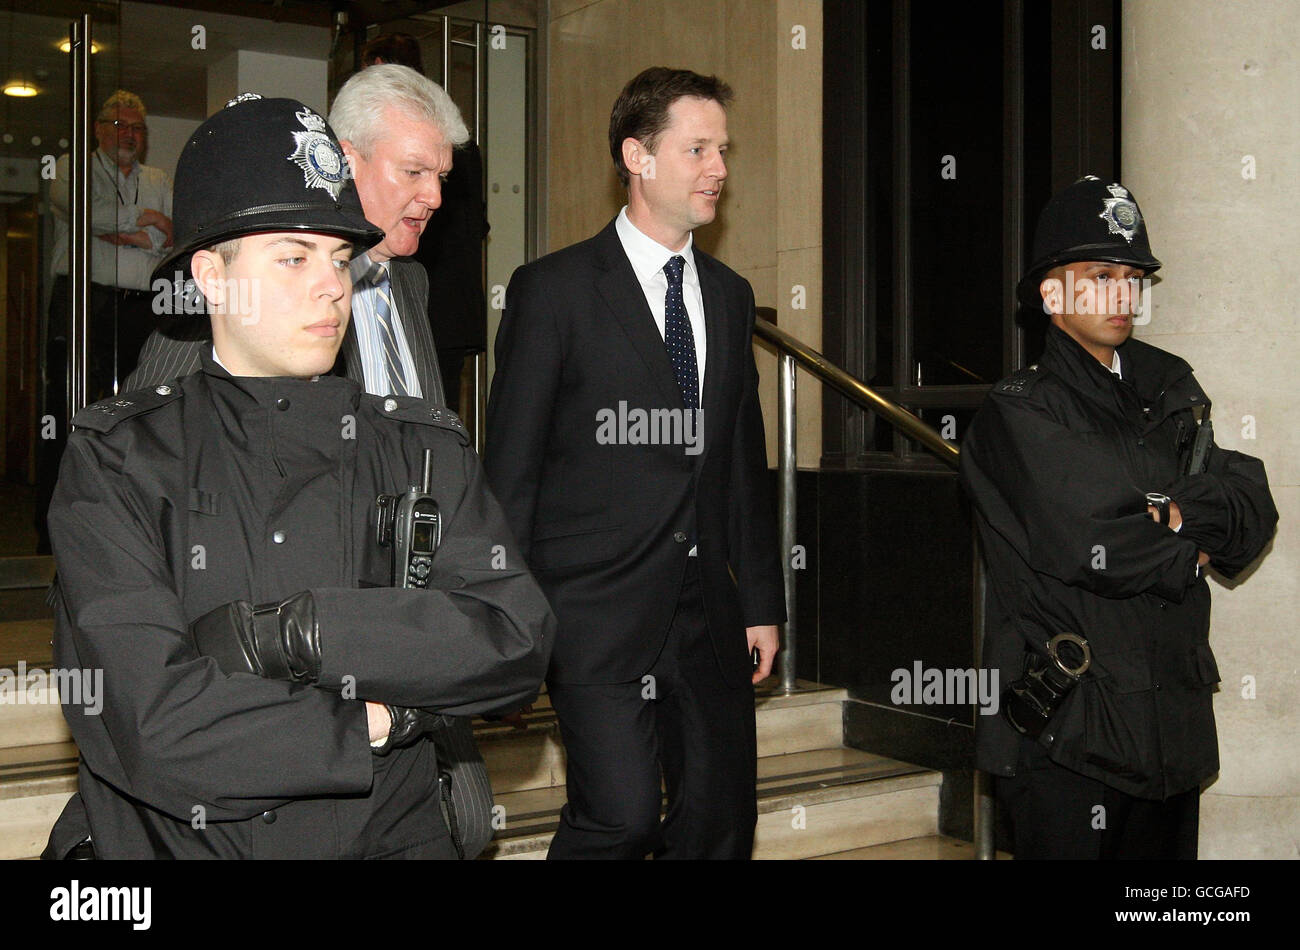 Liberal Democrat leader Nick Clegg leaves Local Government House in Smith Square, London, as the Liberal Democrat shadow cabinet hold talks following the general election result. Stock Photo